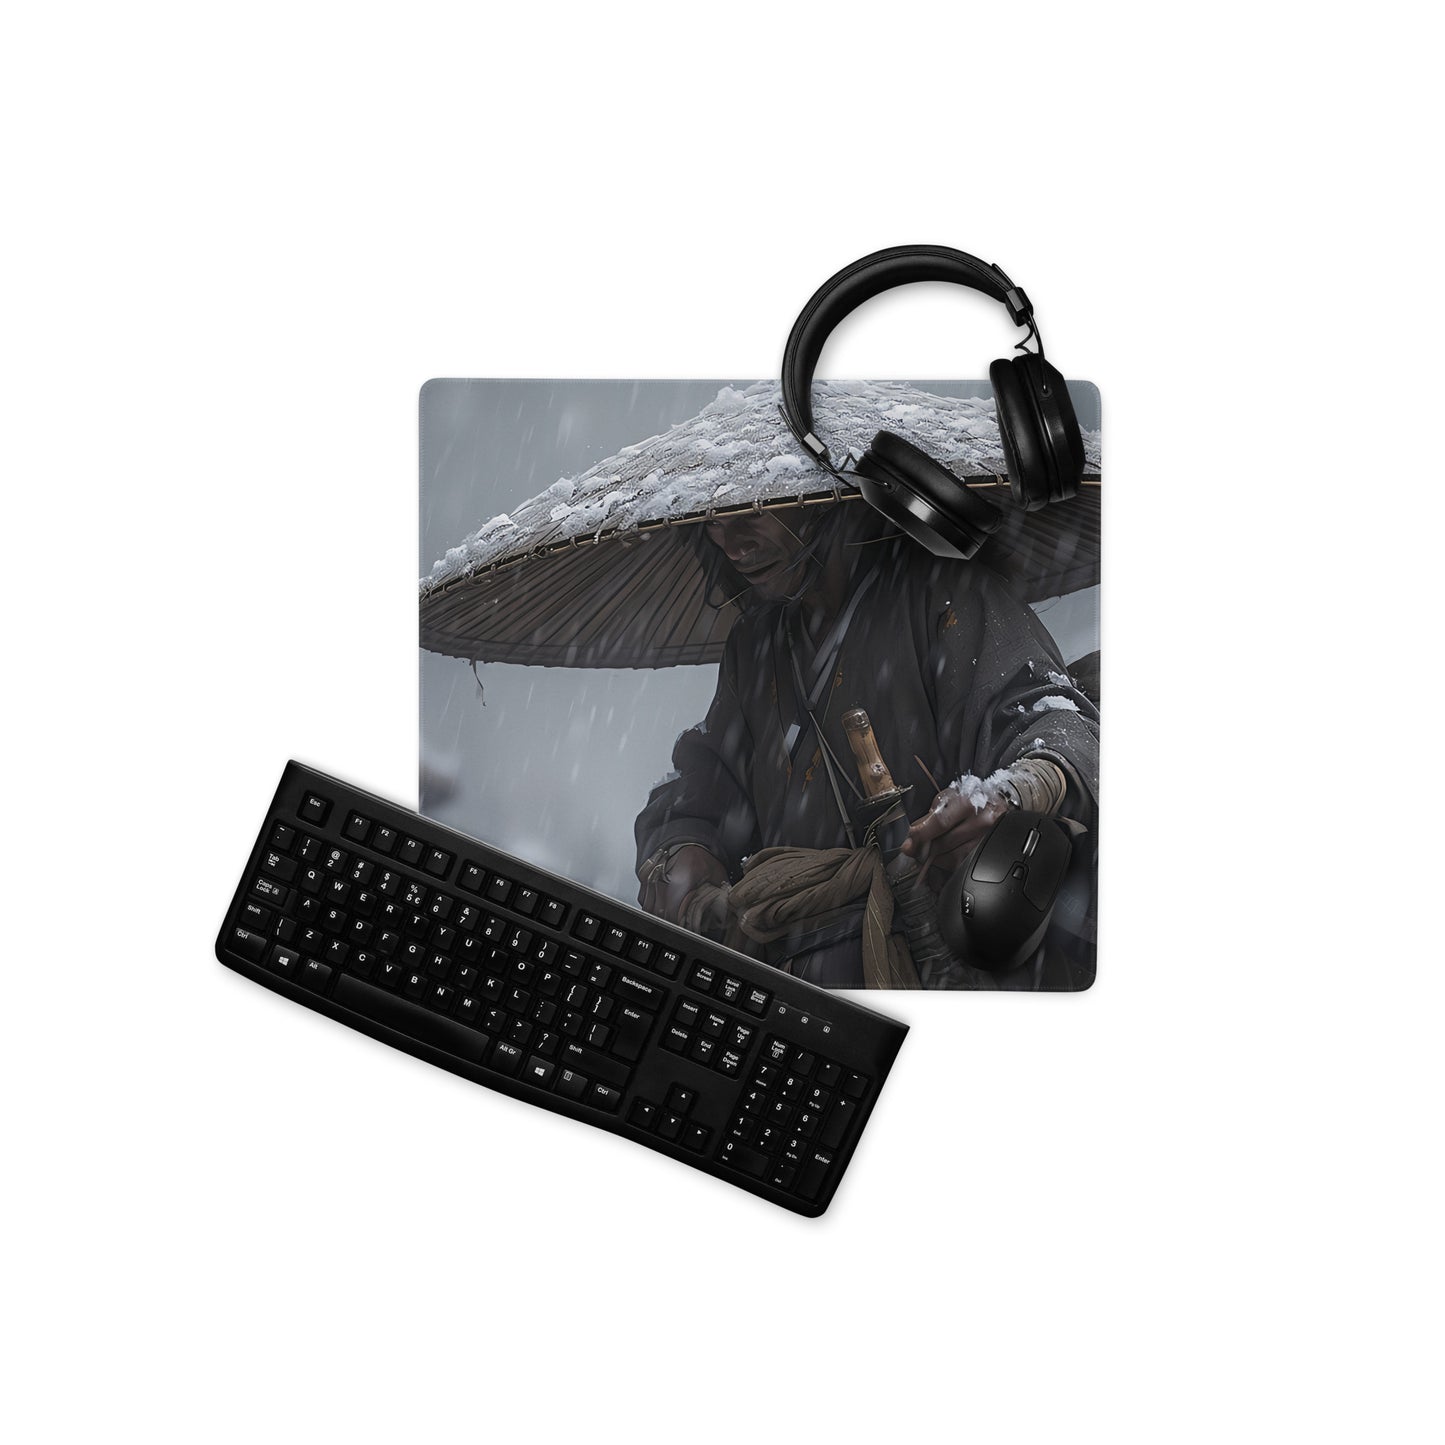 Winter Ronin Gaming mouse pad